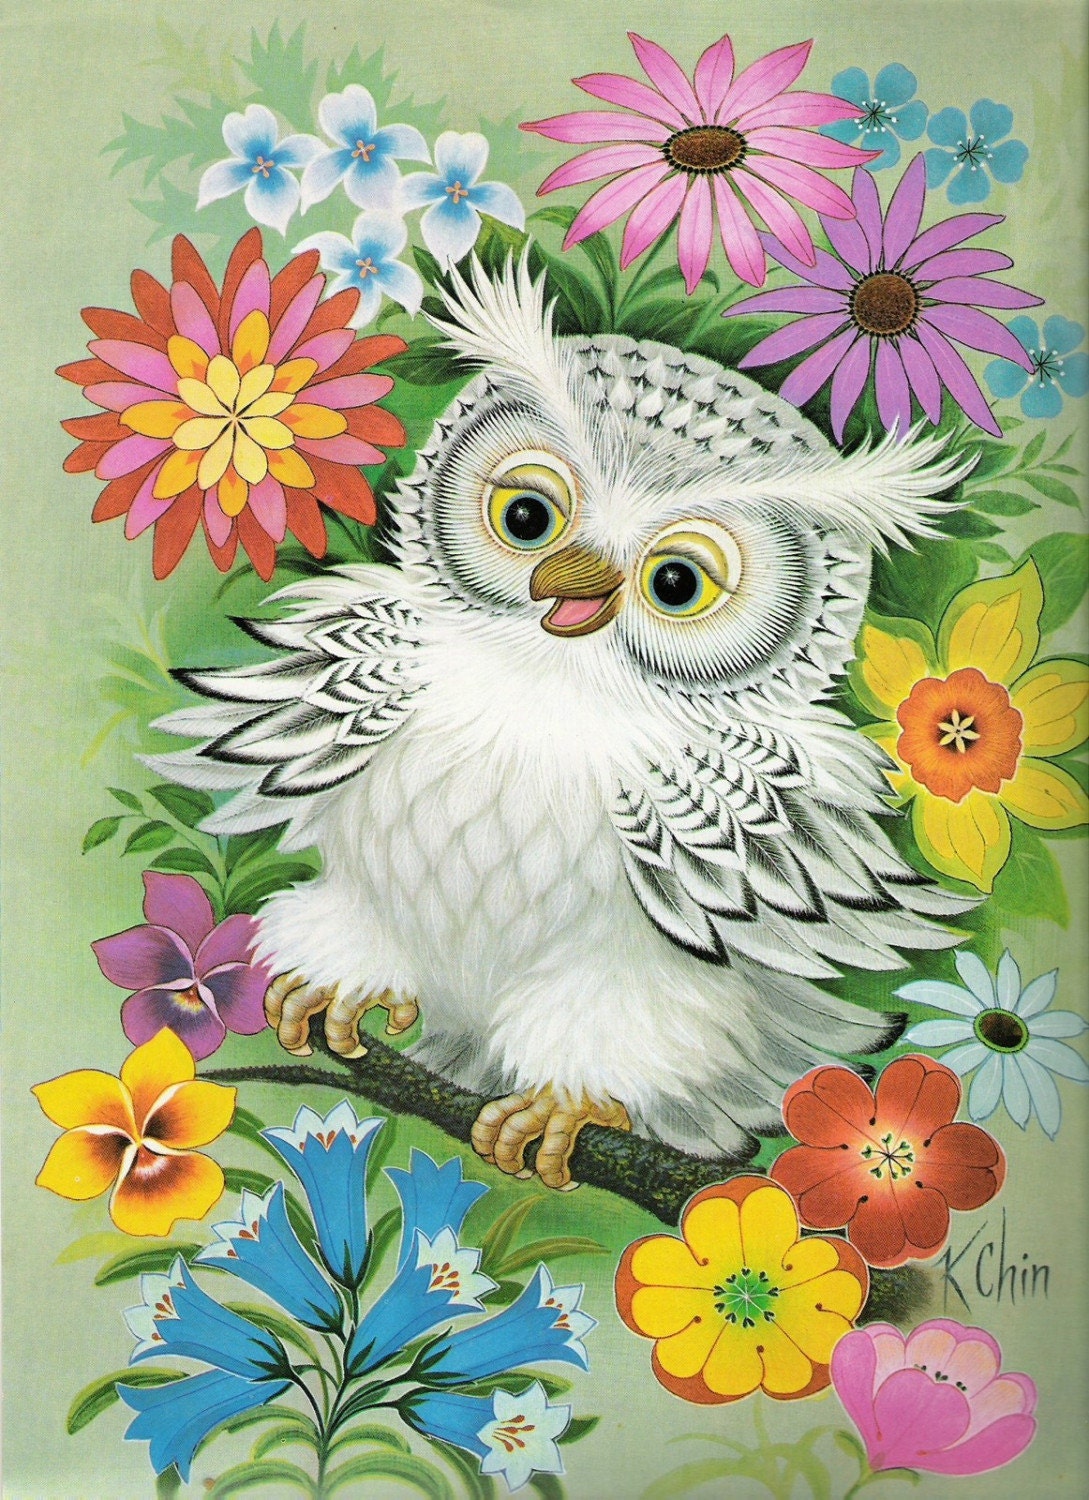 K Chin Wise Owl Series Lithograph Print, 1973, Signed, Donald Art Co., Inc., New York, Paper Ephemera, Collectible, Good Vintage Condition, Wall Art, FREE SHIPPING